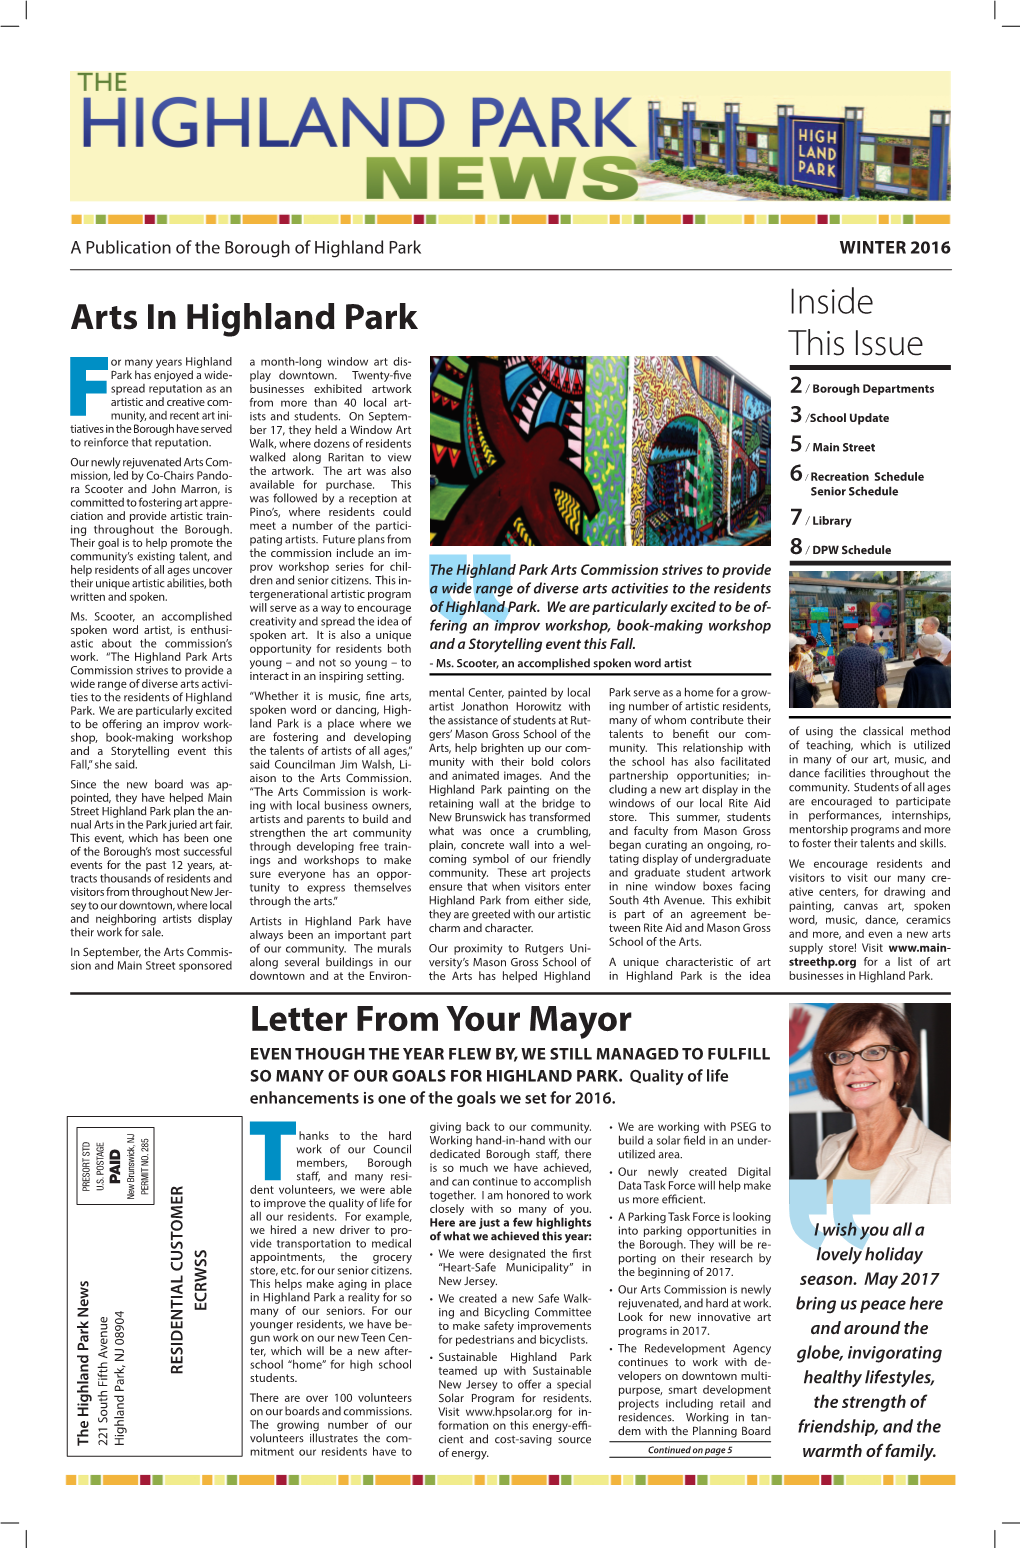 Letter from Your Mayor Inside This Issue Arts in Highland Park